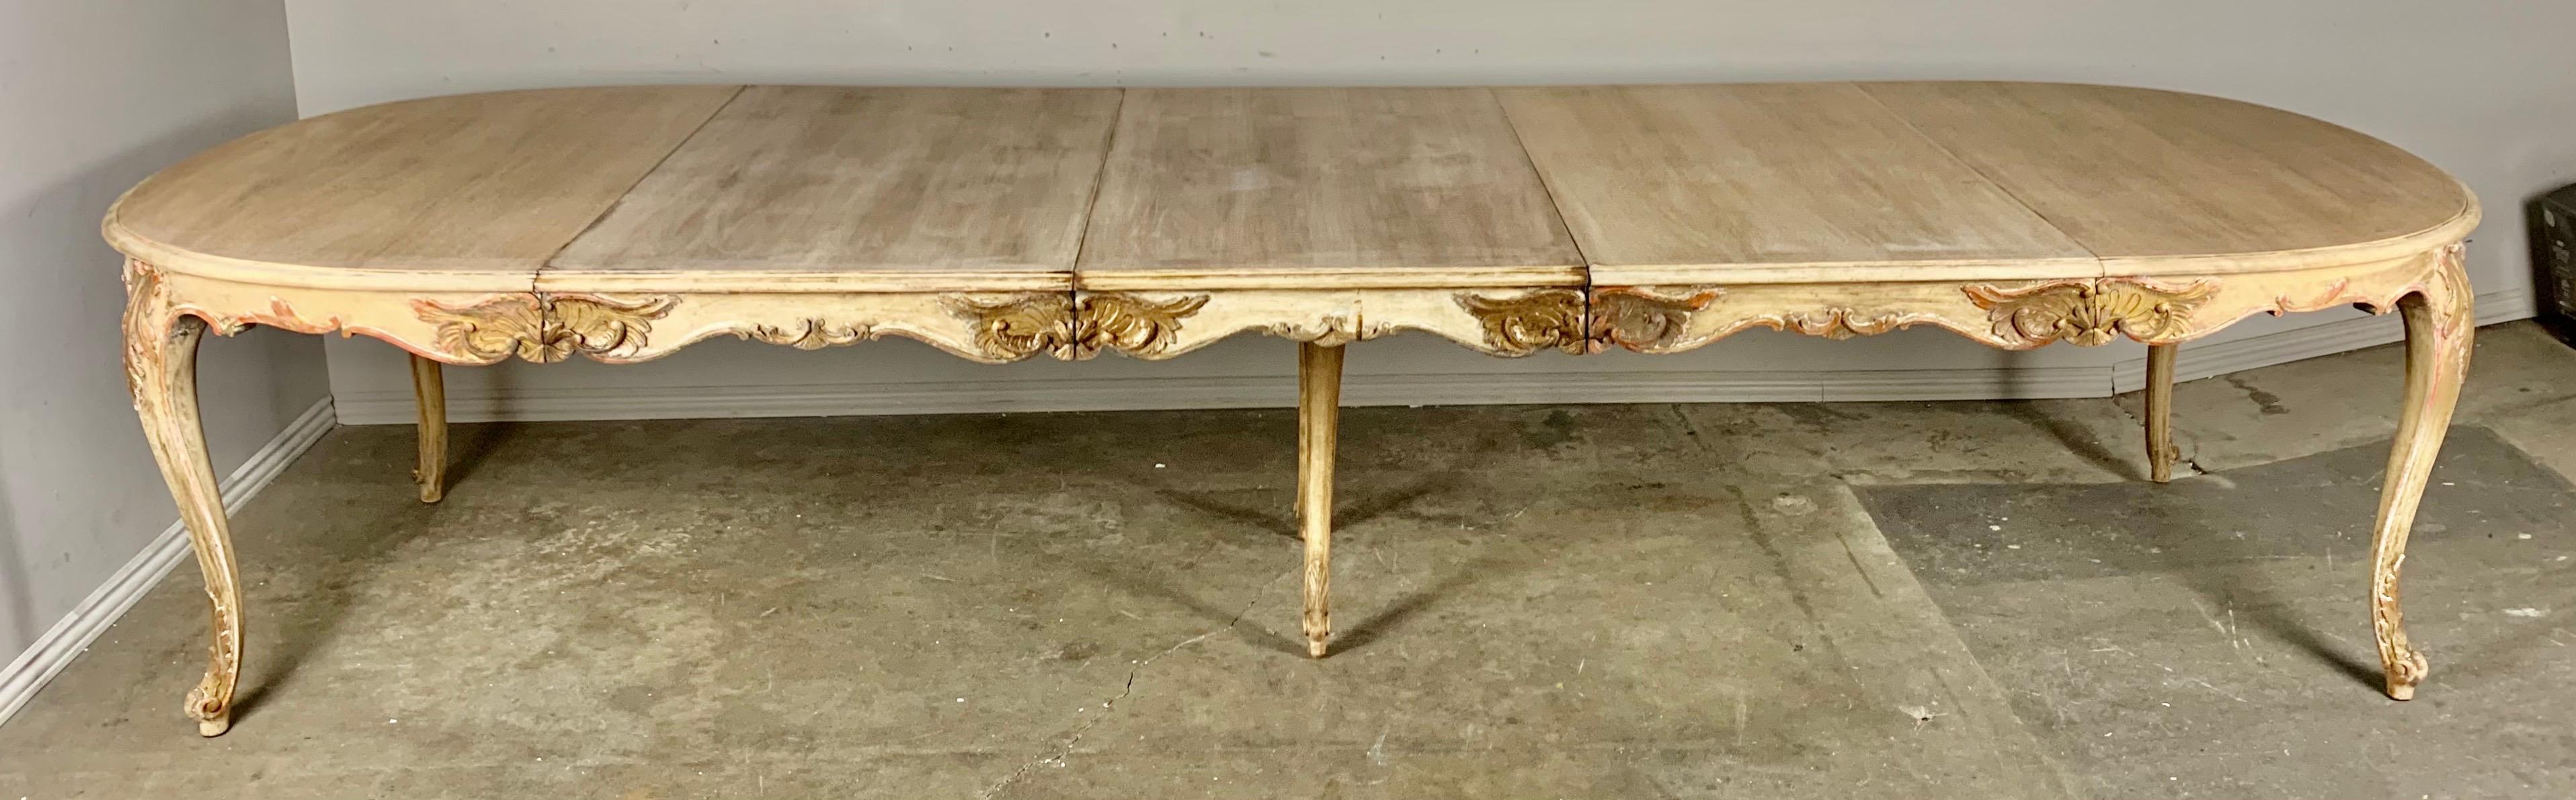 French Louis XV style dining table in a natural wood finish with parcel gilt detailing. There are remnants of paint that can be seen throughout as well. There are three individual leaves that come with the table so it can be adjusted to four sizes